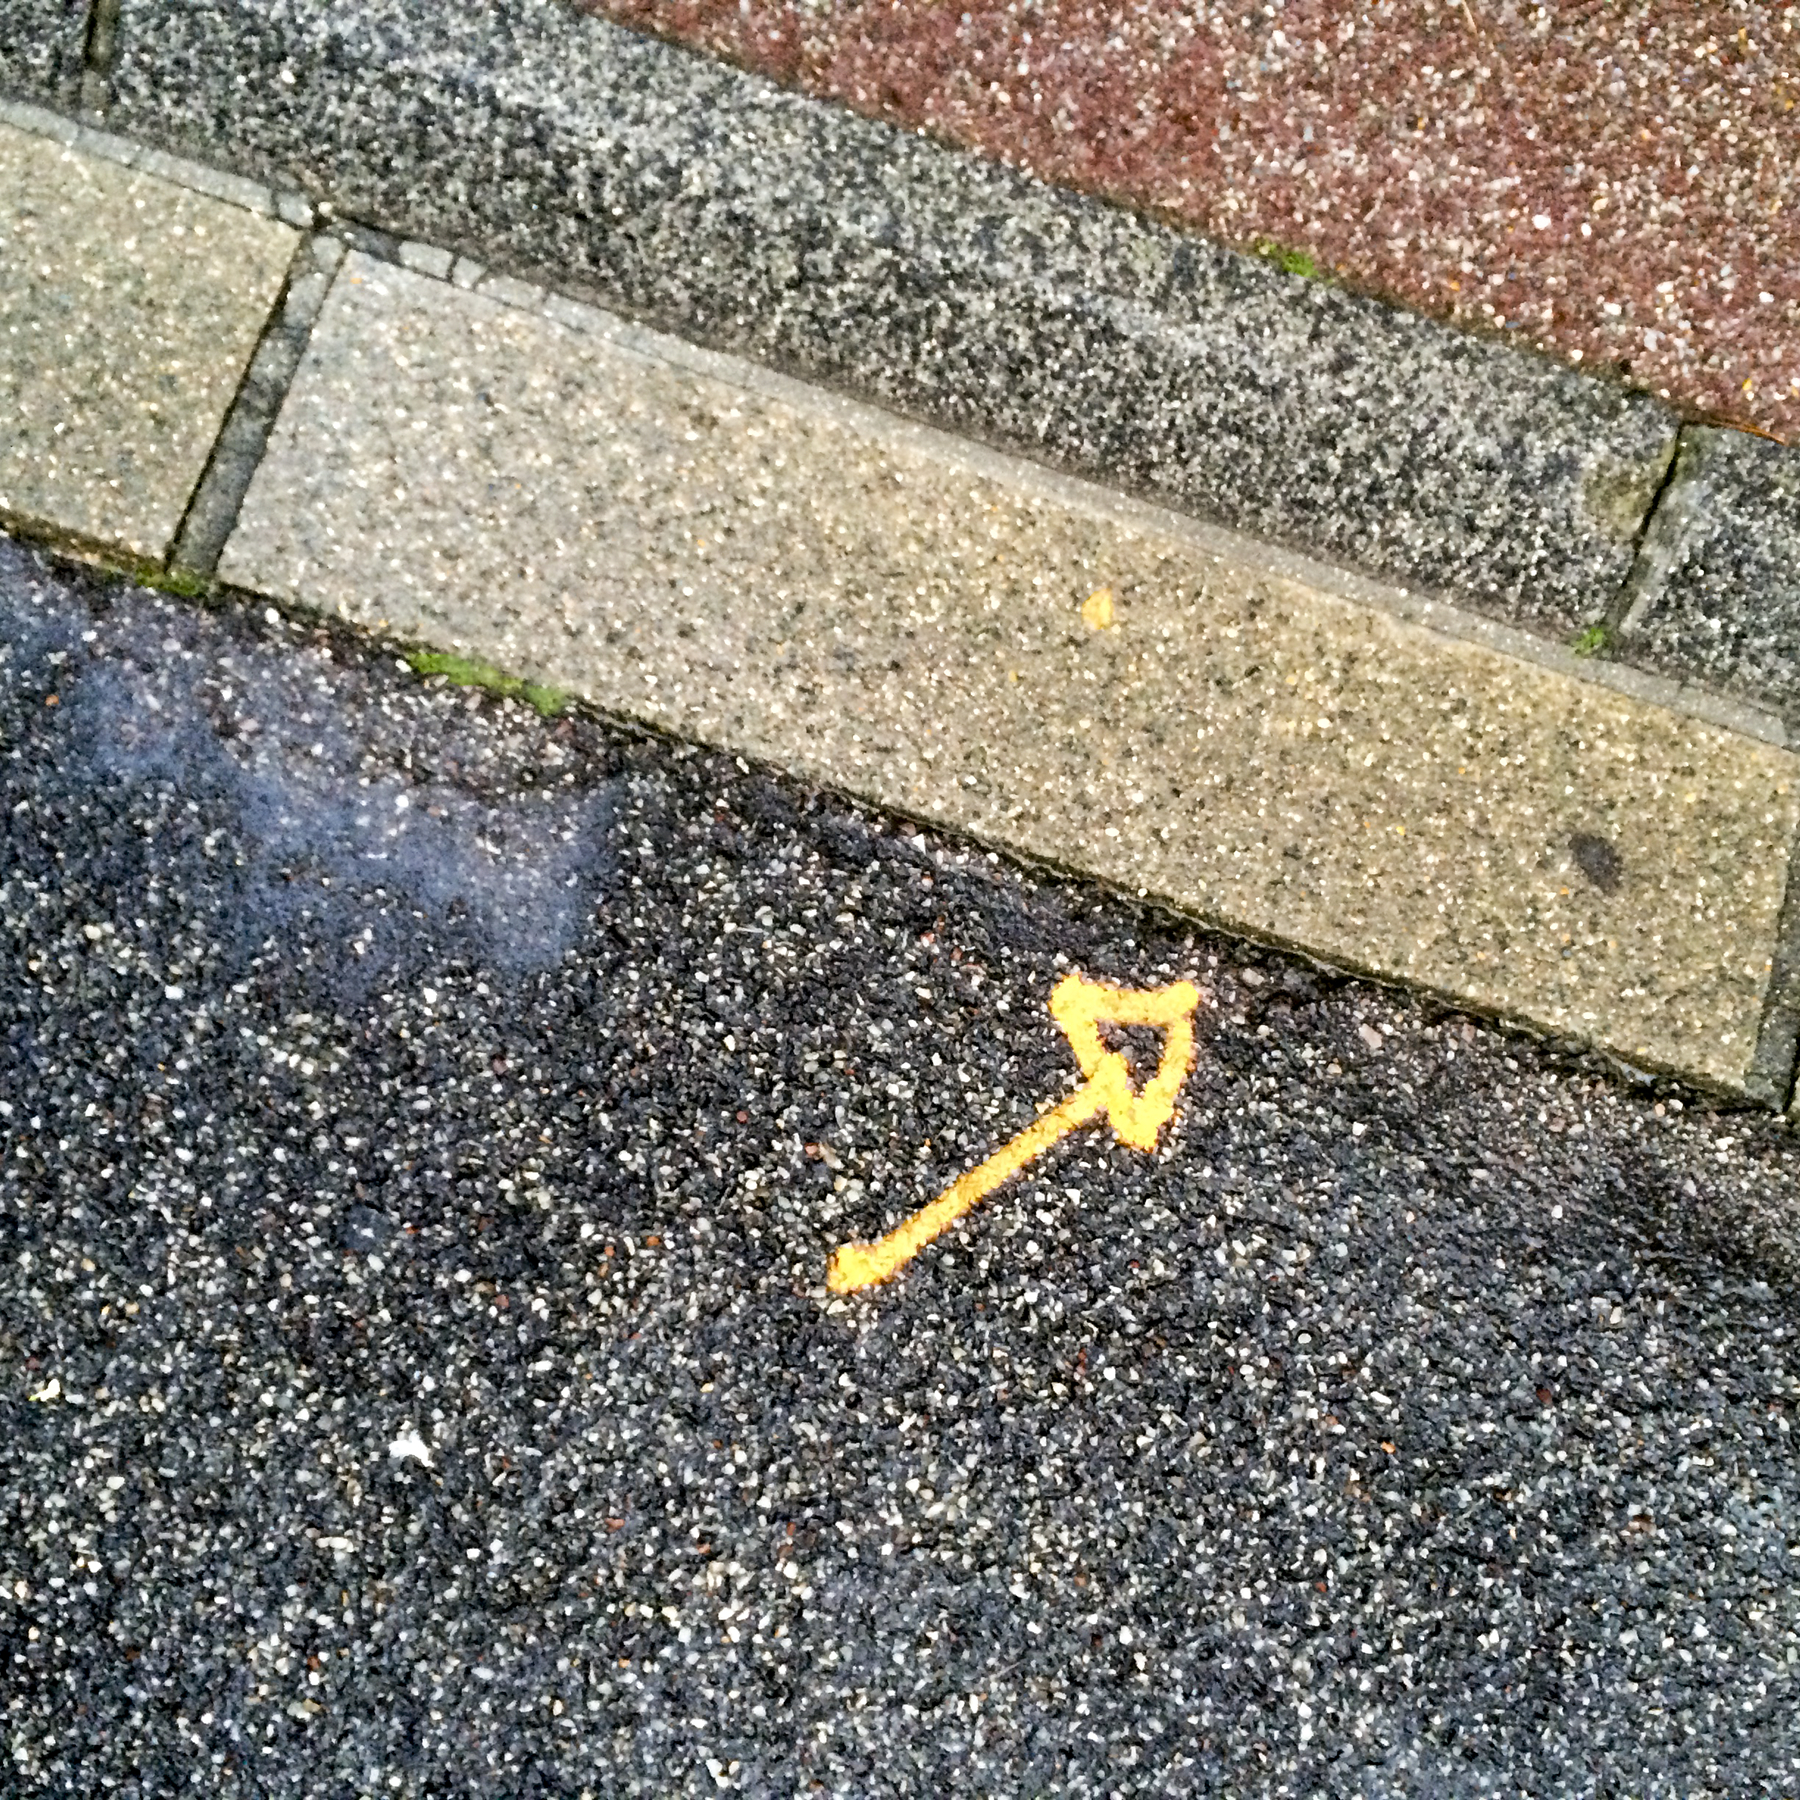 3rd of 6 placeholder images: yellow arrow spraypainted on pavement